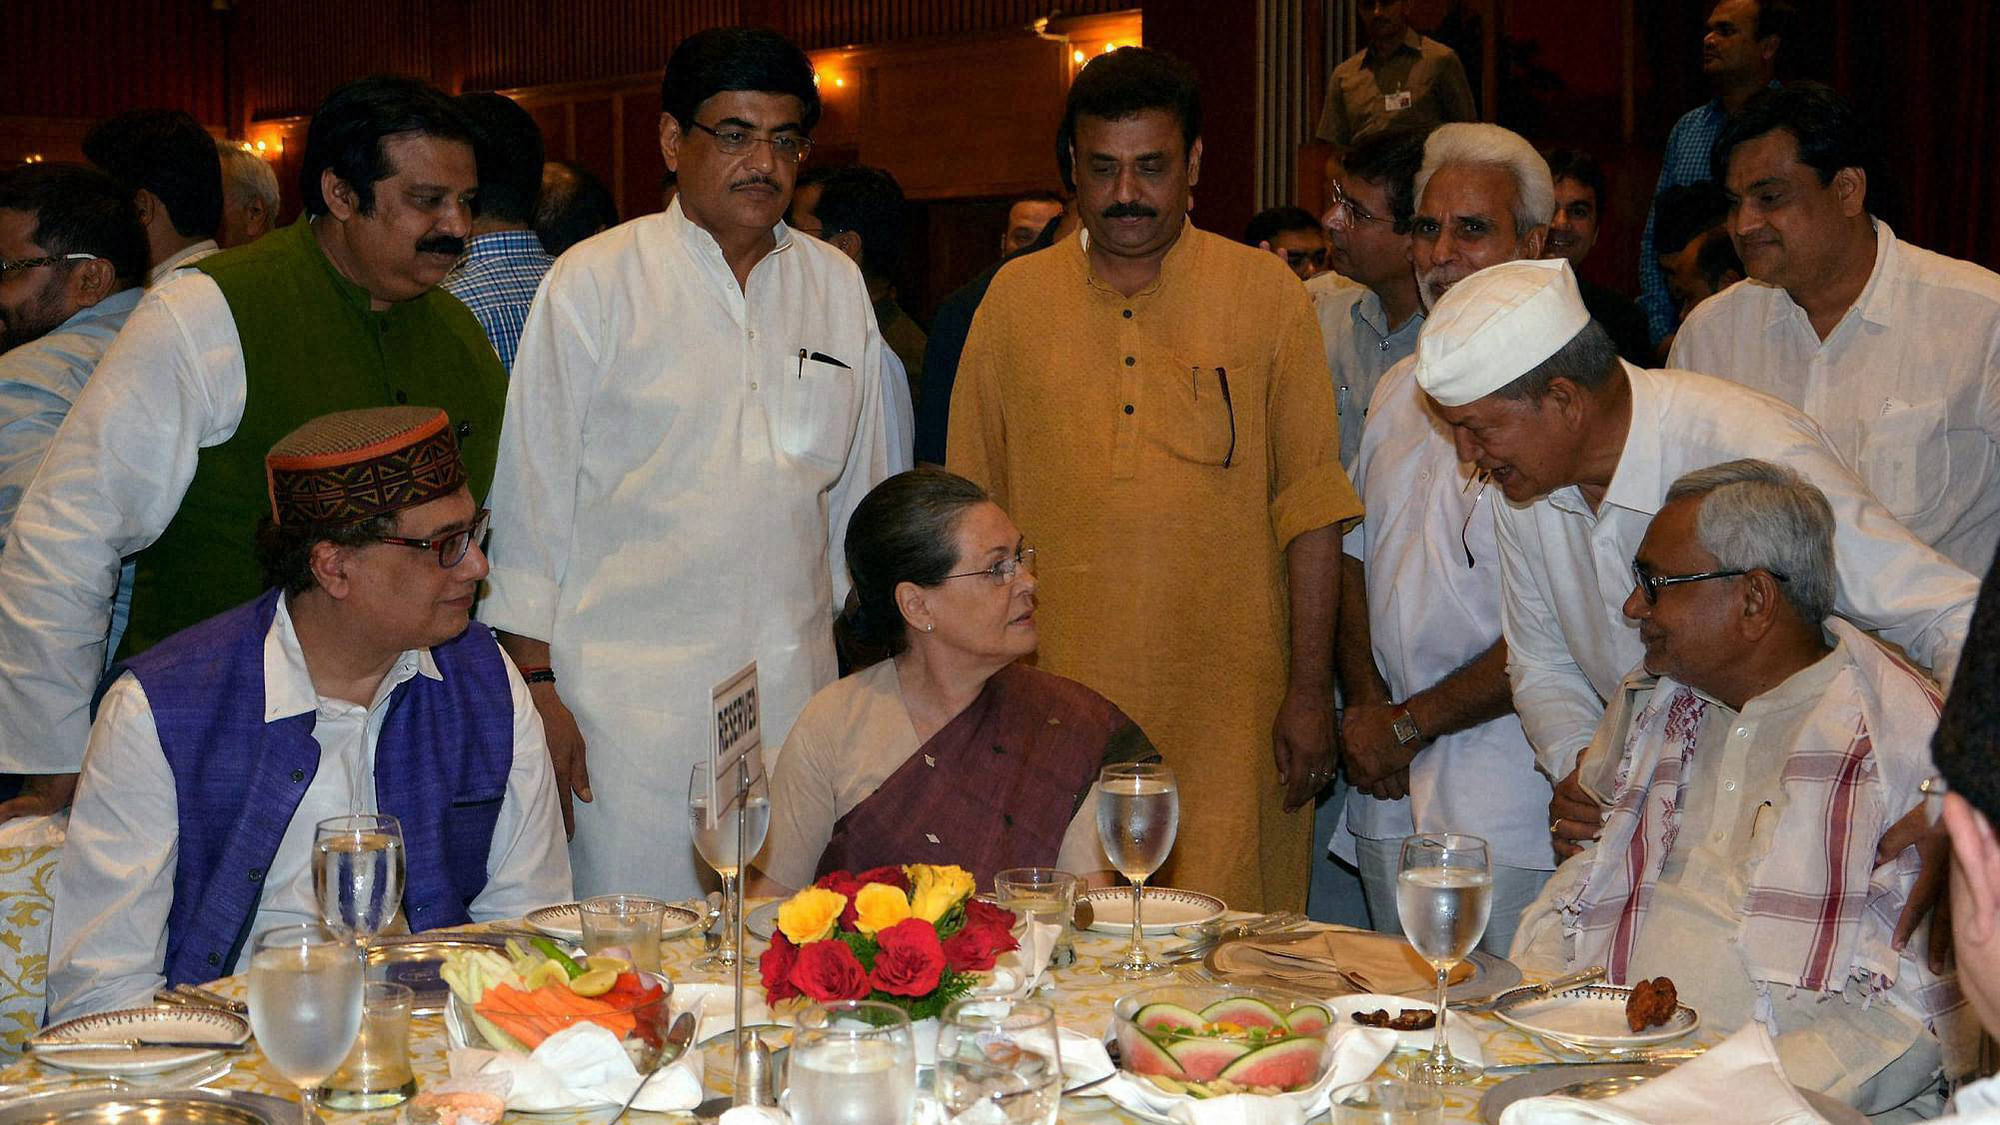 Sonia's Iftar: Some Expected Hits and a Few Uncomfortable Misses